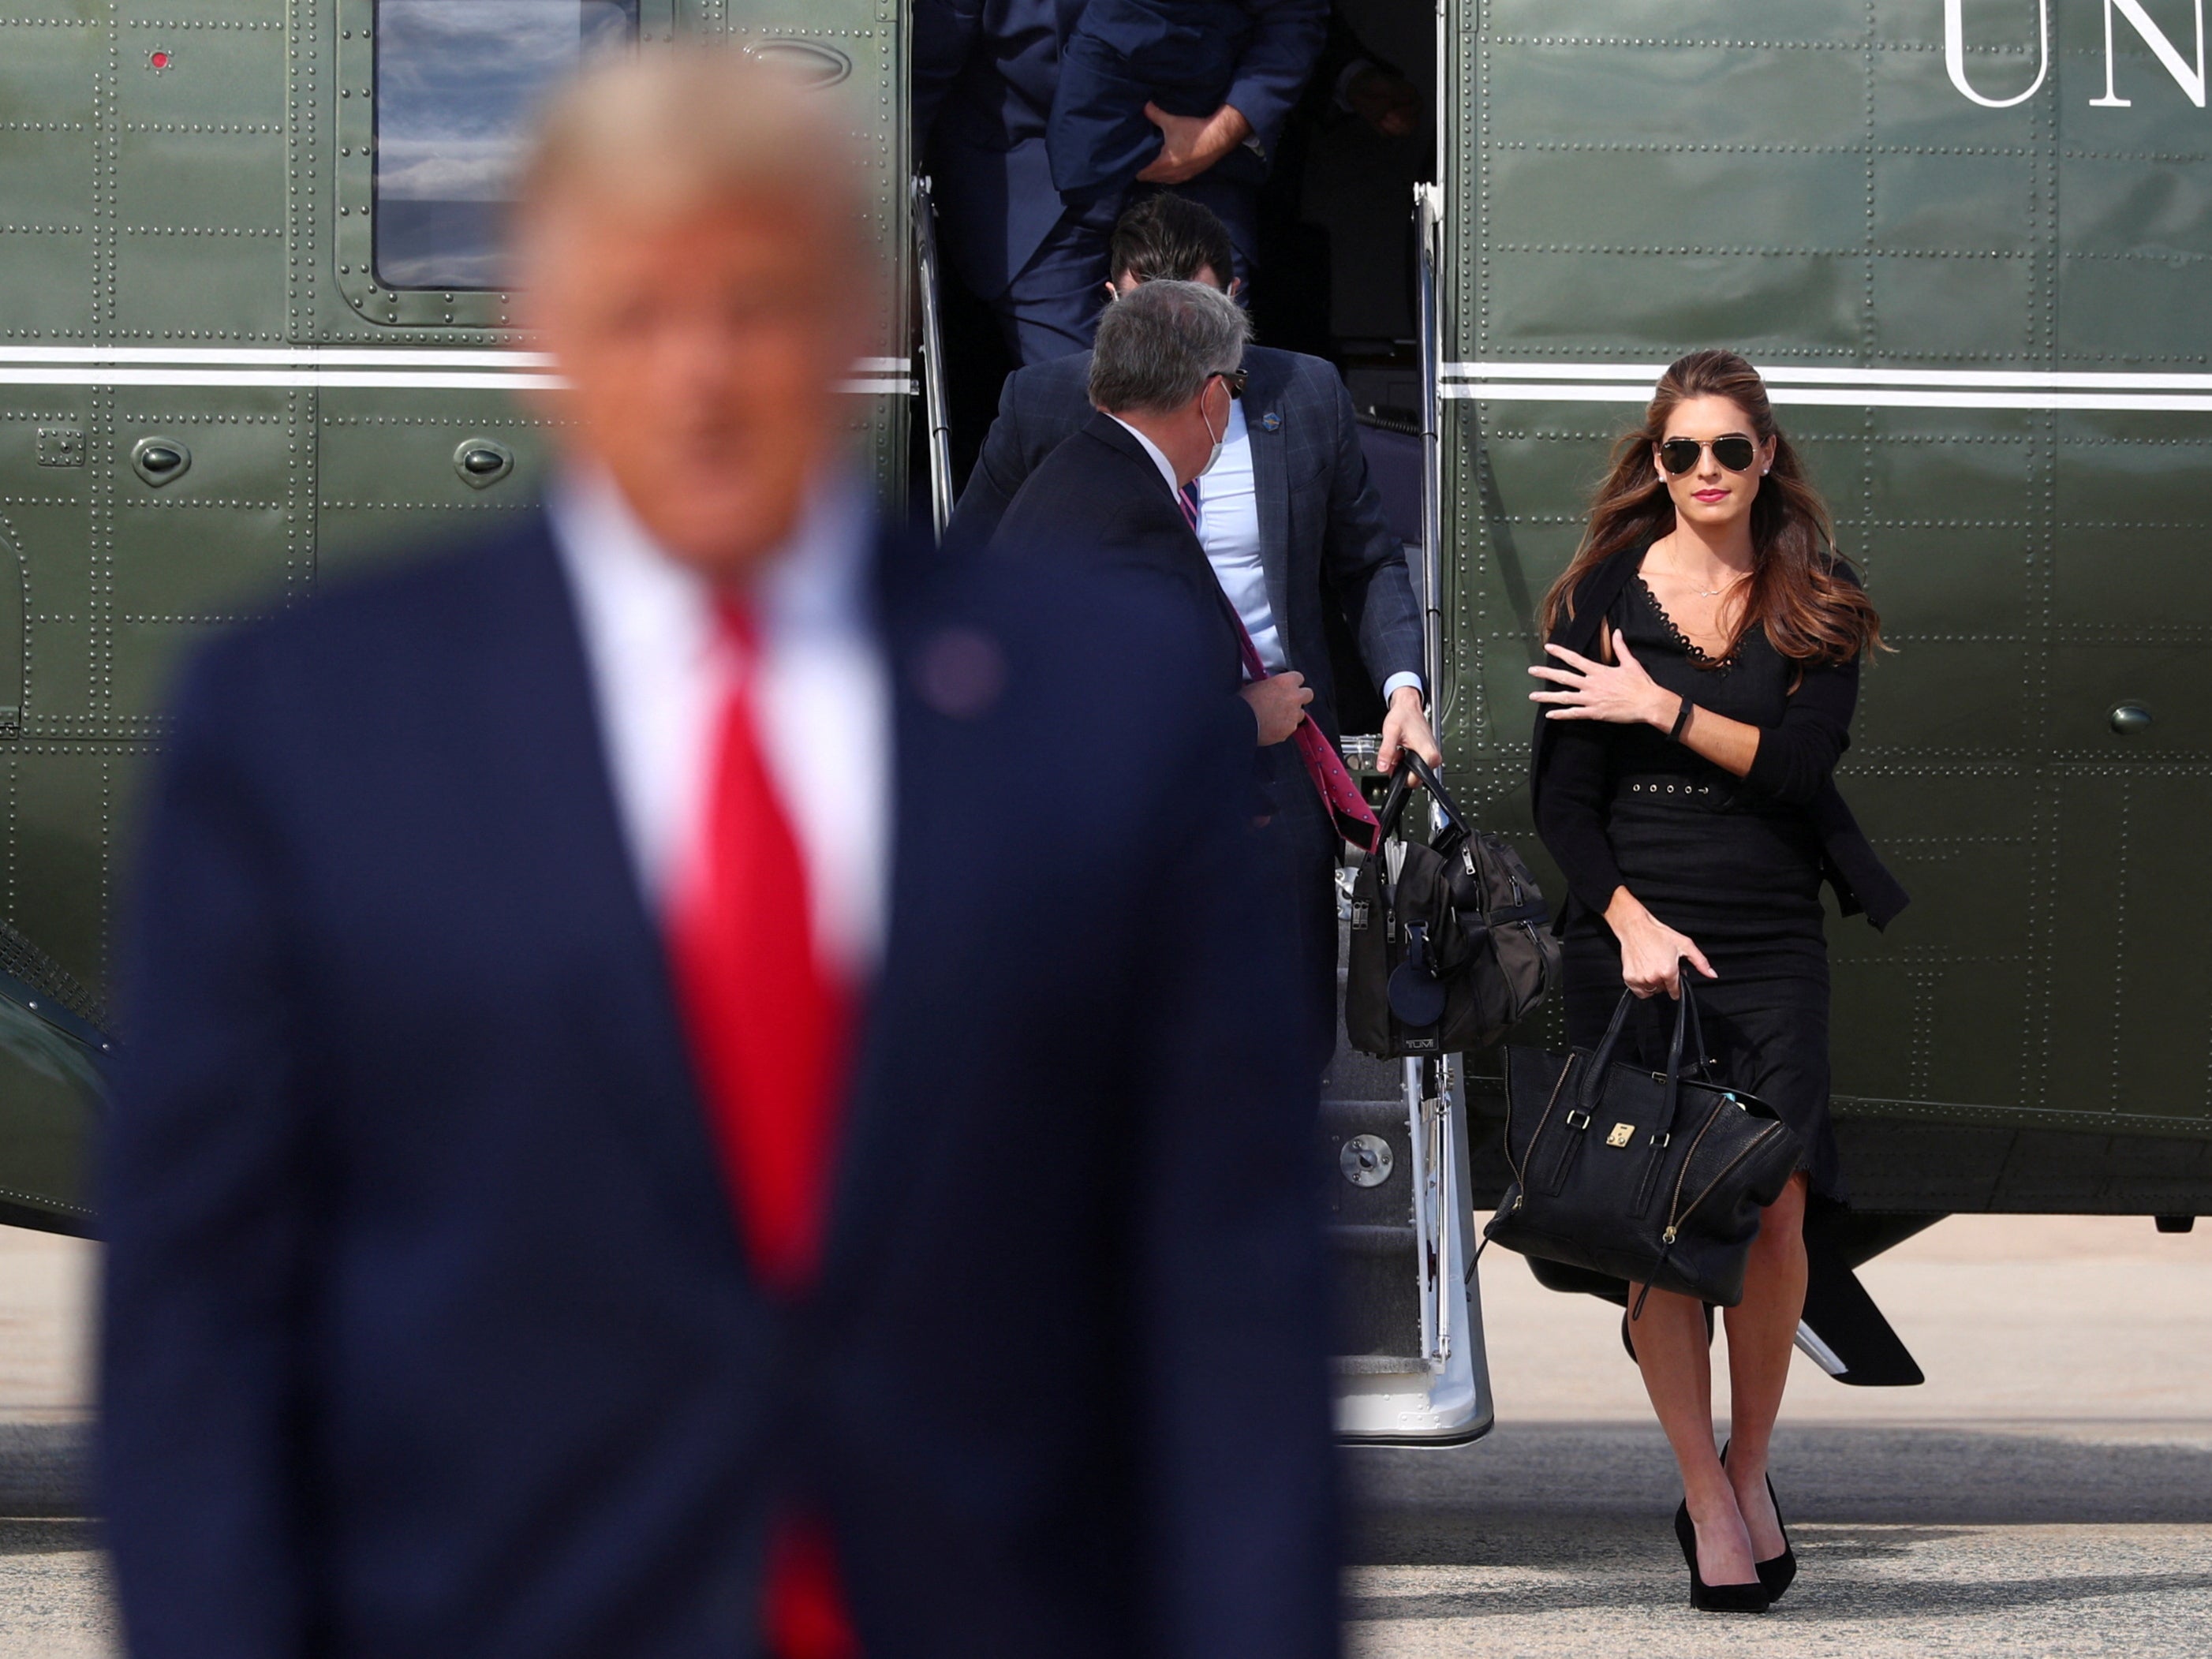 Hope Hicks walks from Marine One prior to boarding Air Force One as she departs Washington with then-President Donald Trump on 23 October 2020